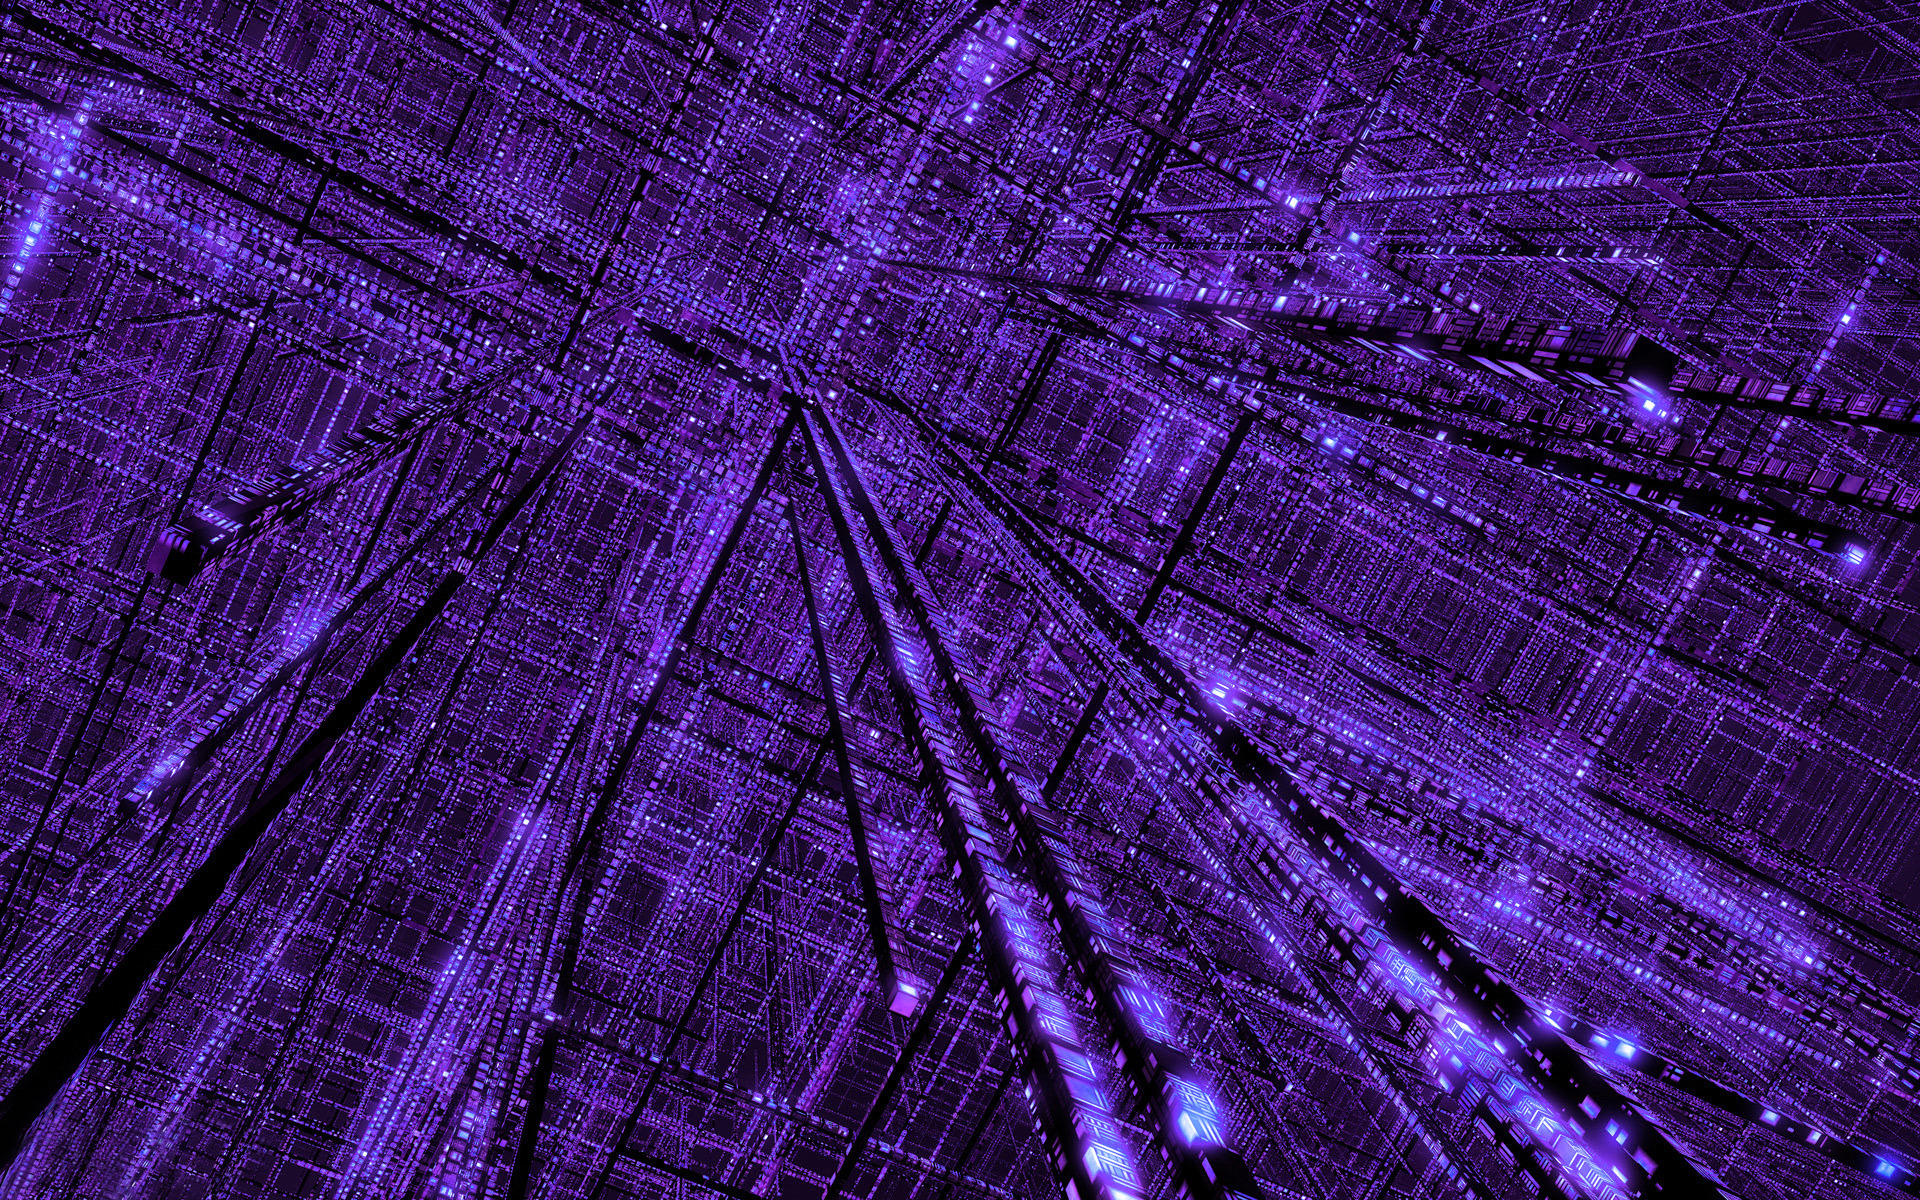 Hd Purple Abstract Wallpapers